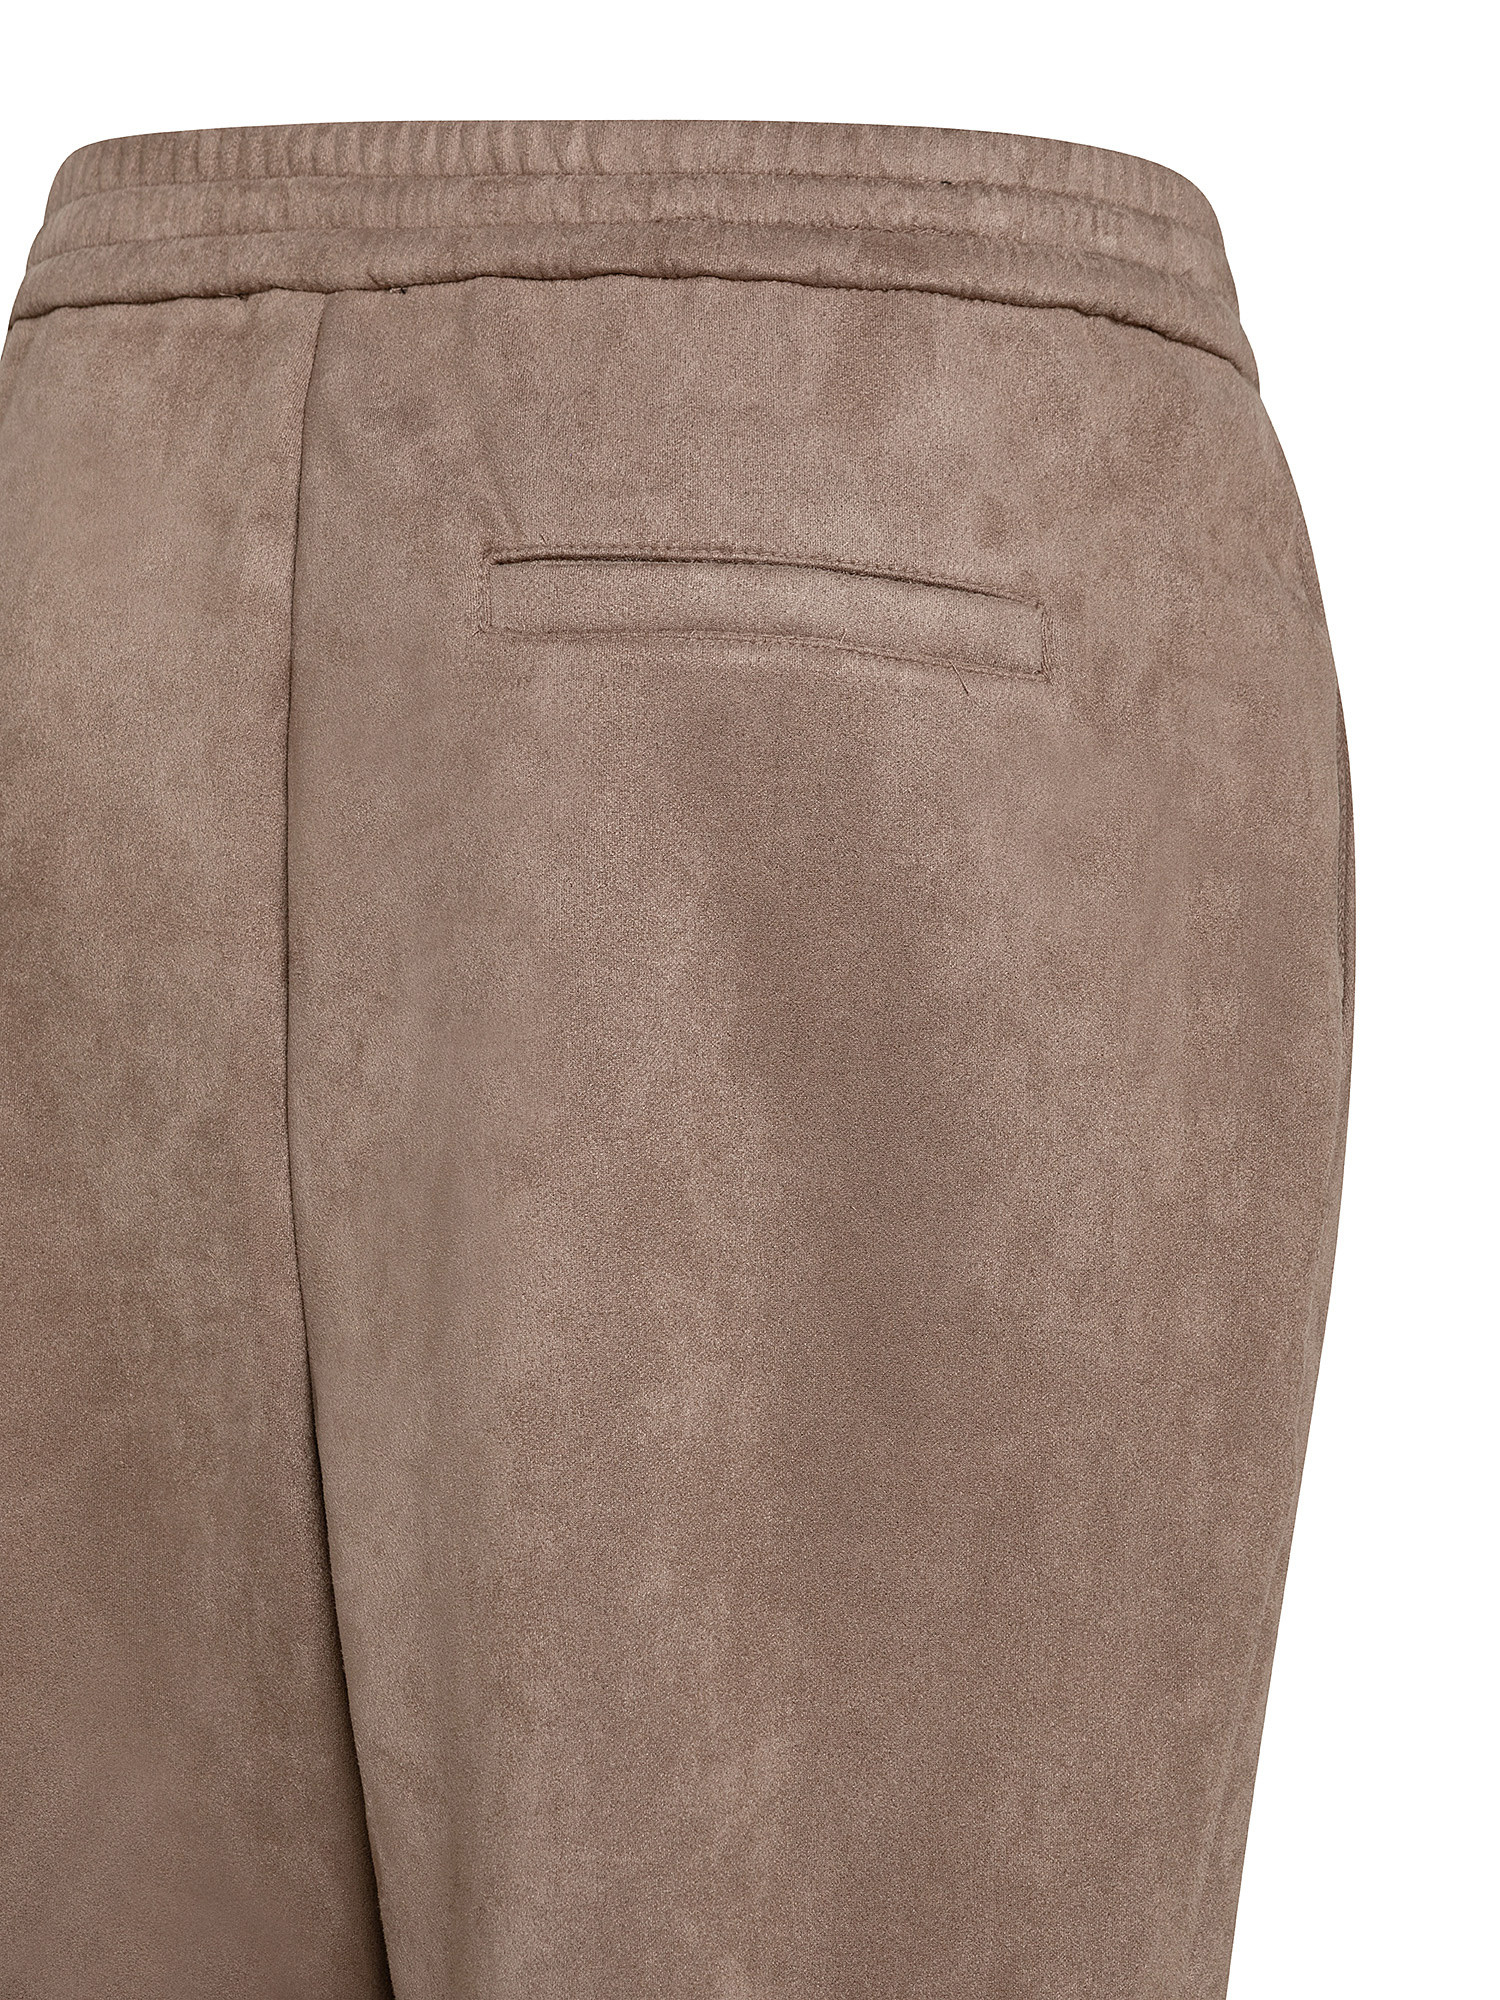 Suede jogger trousers, Brown, large image number 2